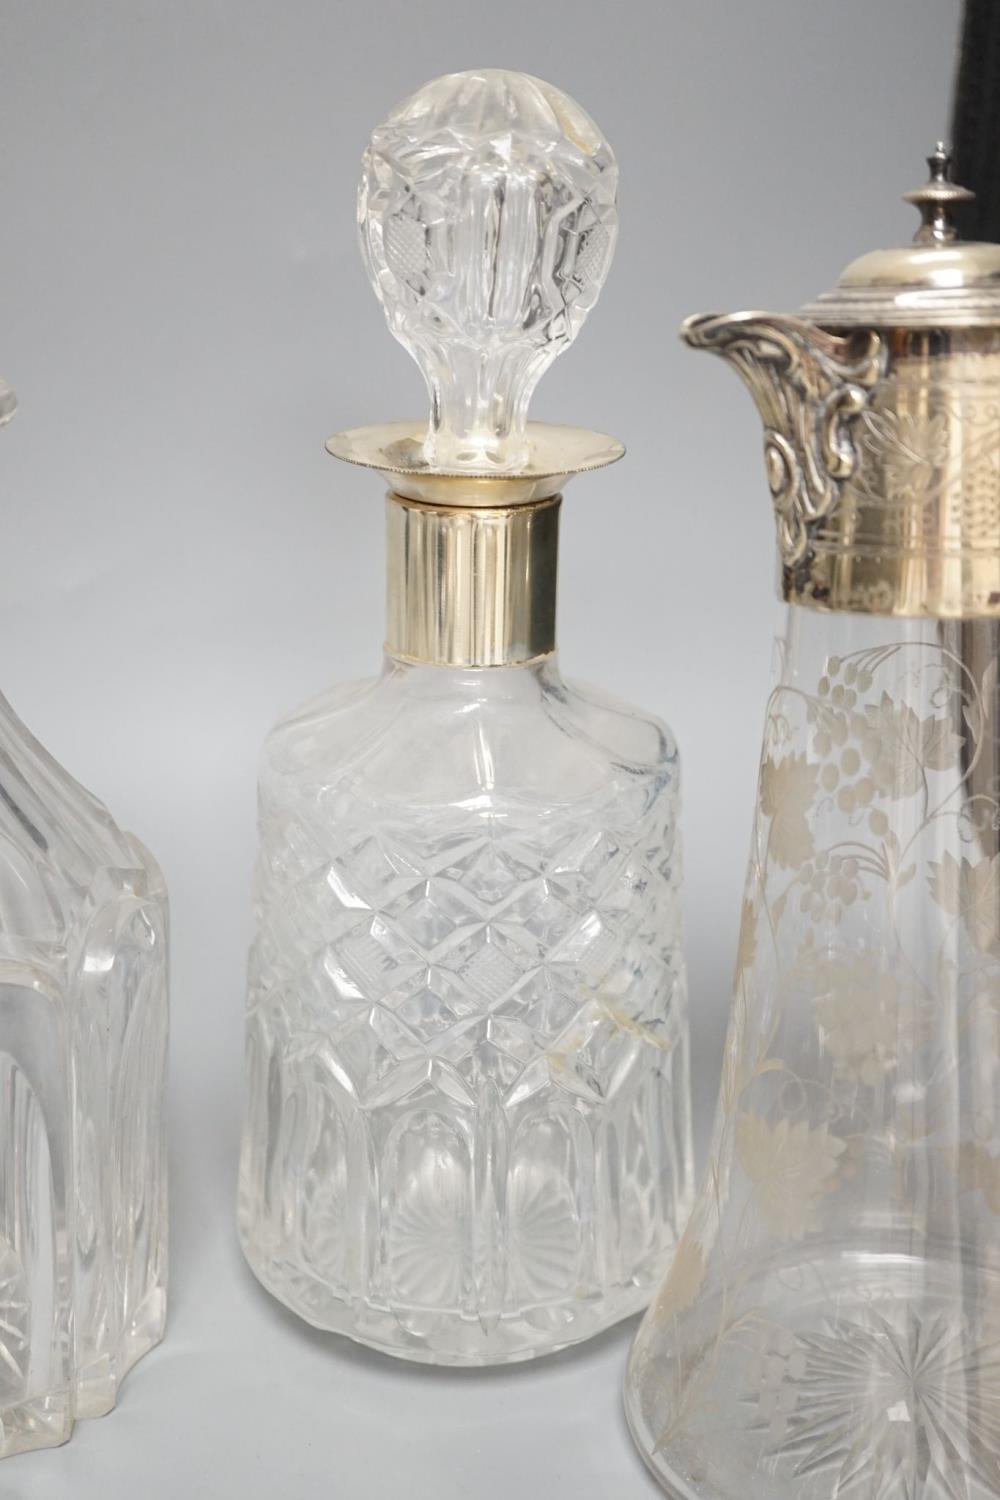 A Hukin and Heath claret jug and other decanters etc. - Image 6 of 9